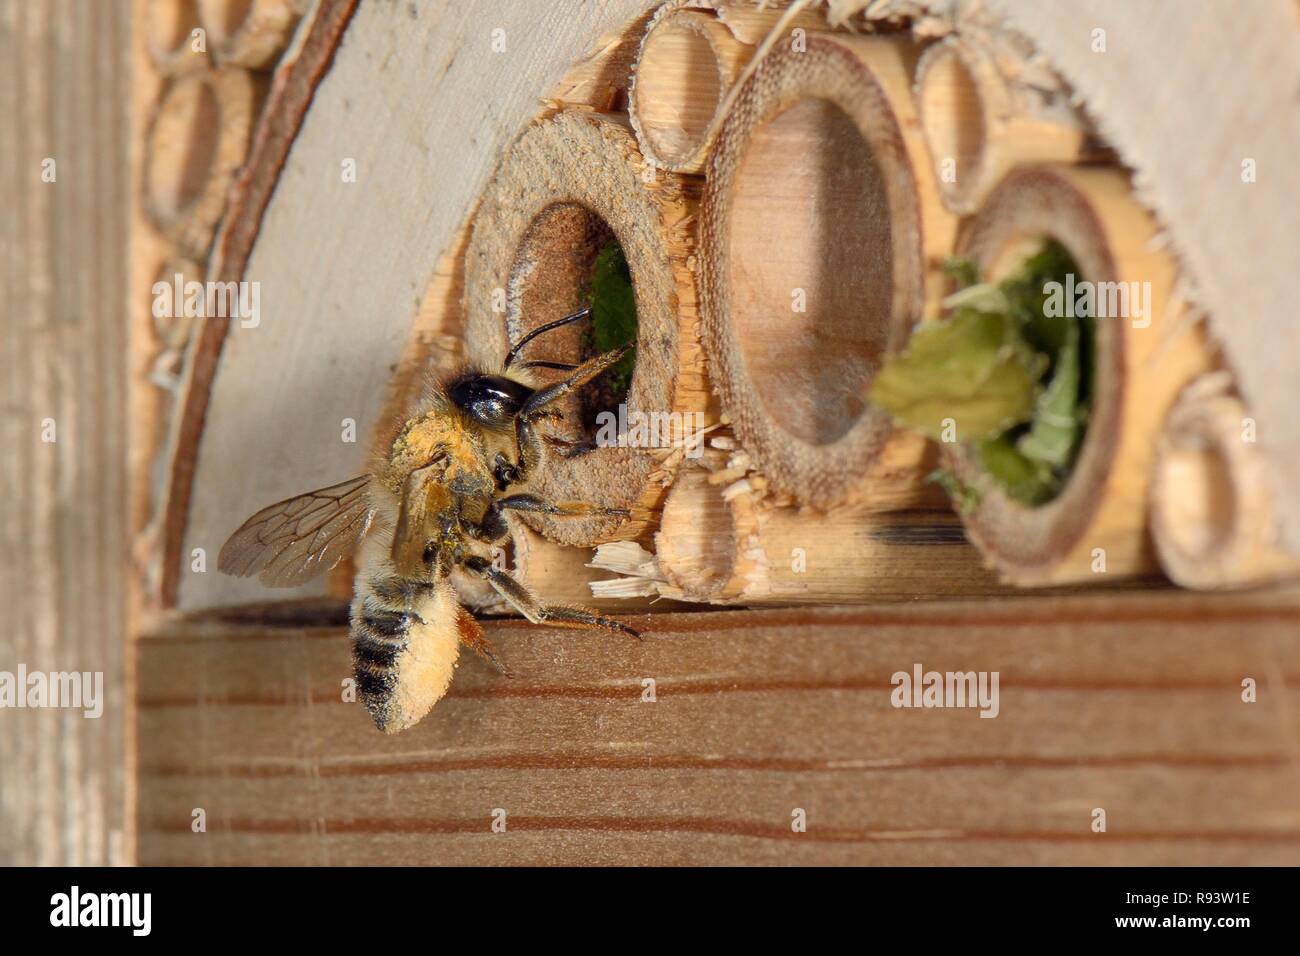 Leafcutter / Rose-cutter bee (Megachile willughbiella) lands at its nest in an insect hotel to provision it with pollen carried on its furry abdomen. Stock Photo